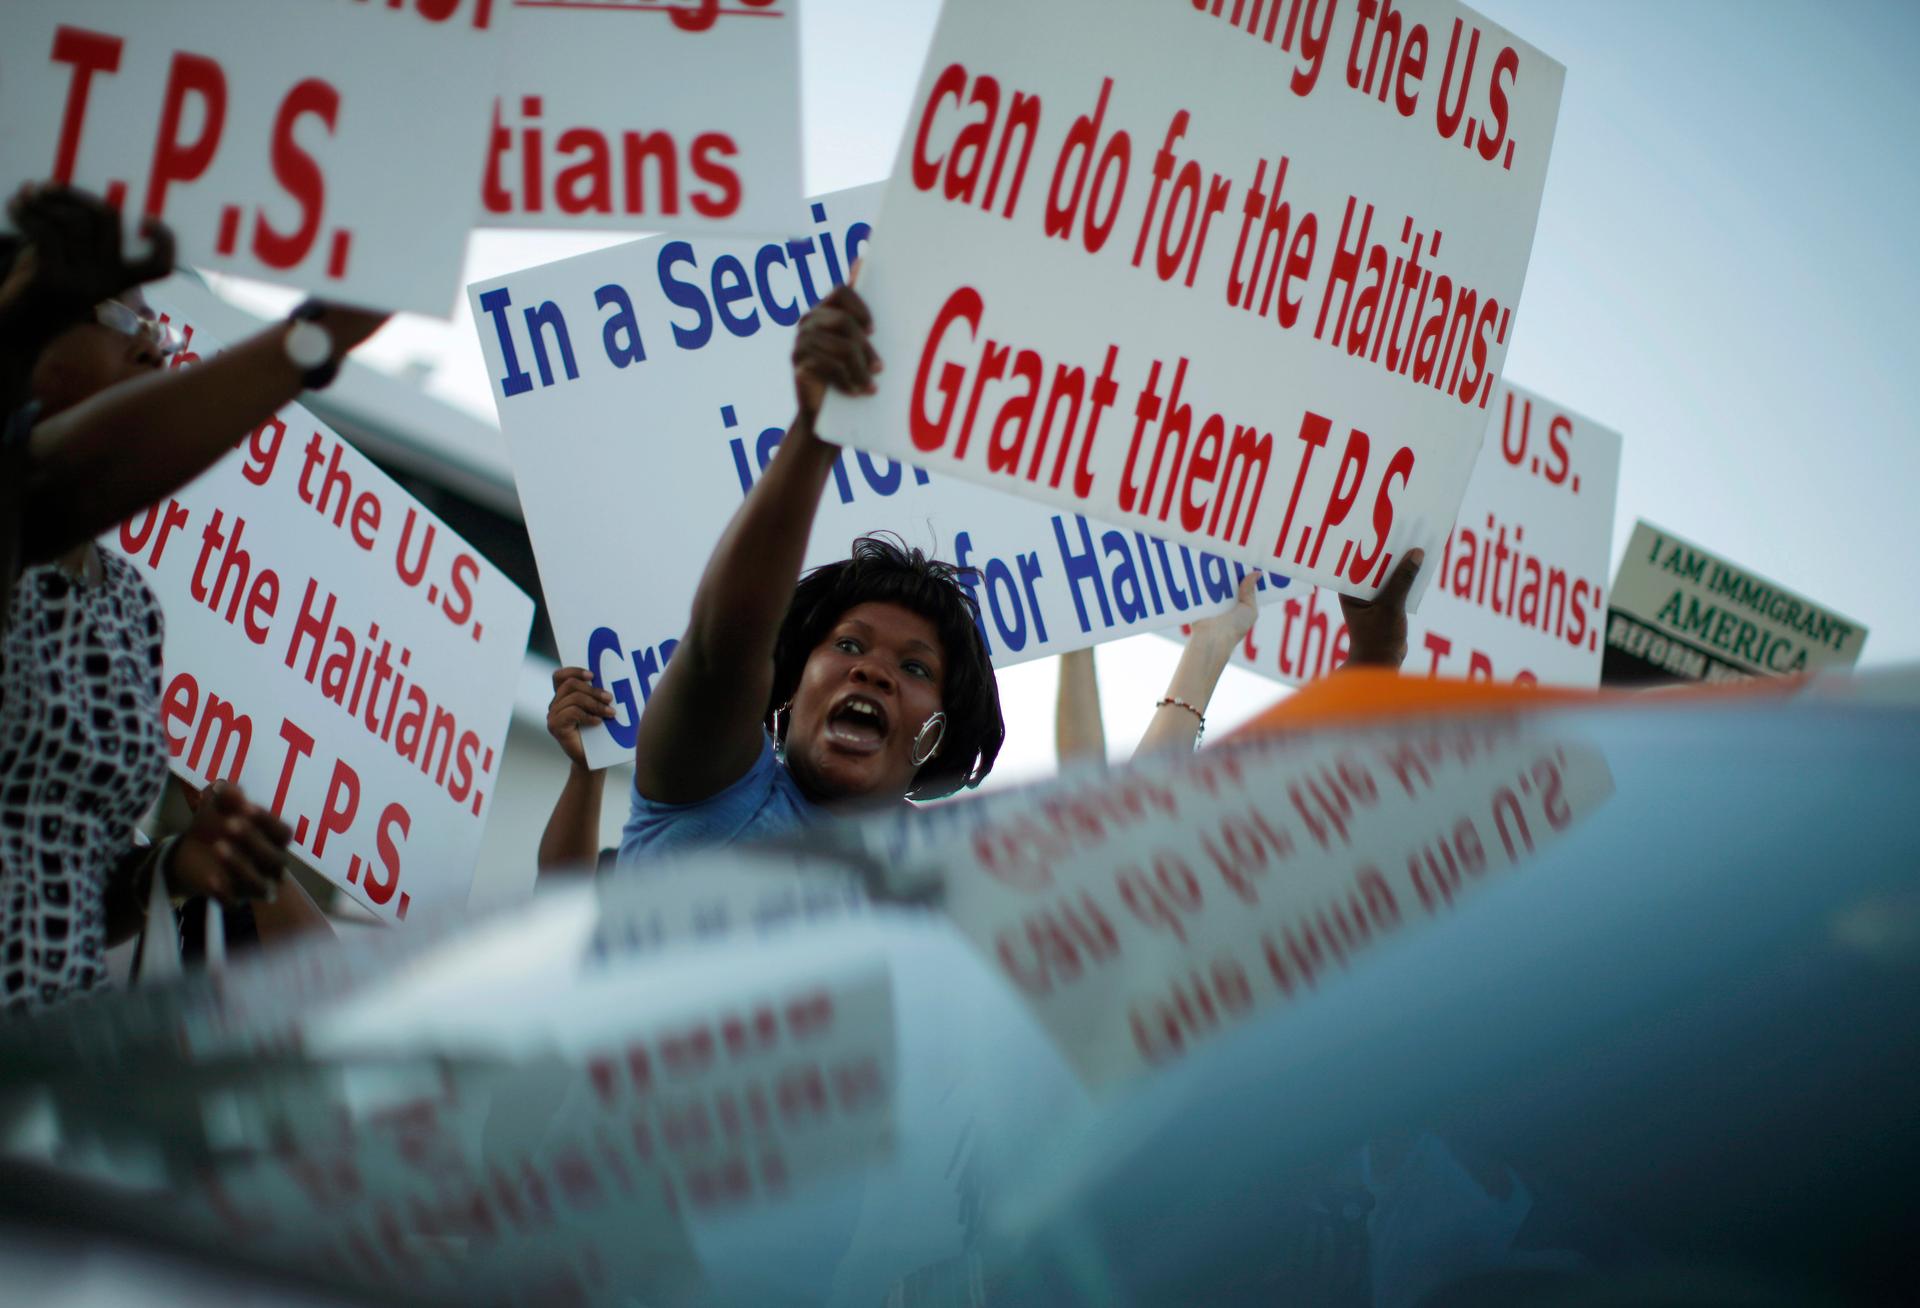 This is a rally in support of TPS for Haitian immigrants back in 2009, during a visit by former US President Barack Obama to Miami, Florida.